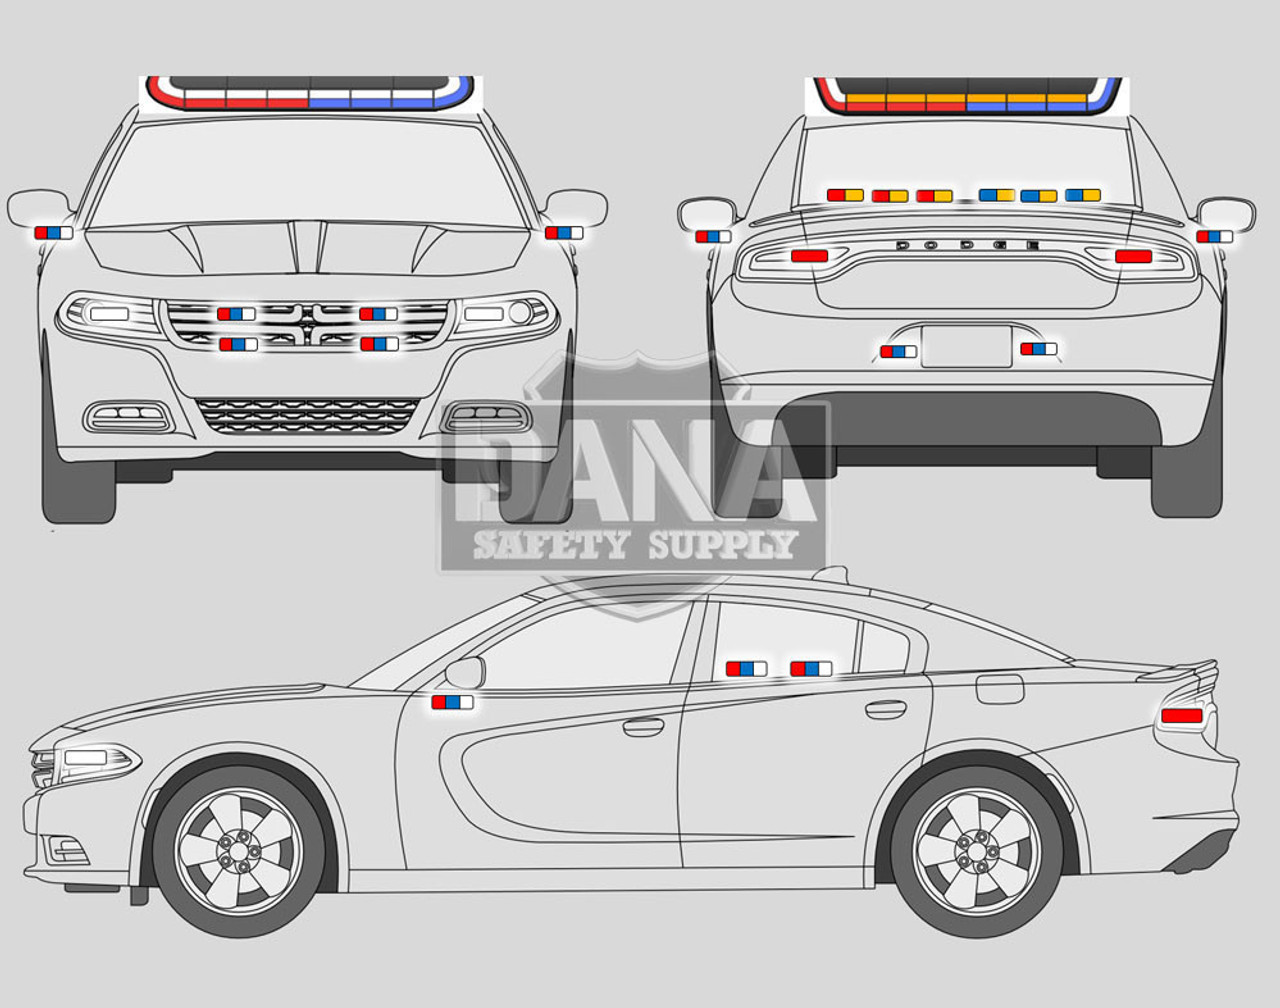 New 2023 Silver Dodge Charger PPV V8 RWD ready to be built as a Marked Patrol Package Police Pursuit Car (Emergency Lighting, Siren, Controller, Partition, Window Bars, etc.), + Delivery, S1